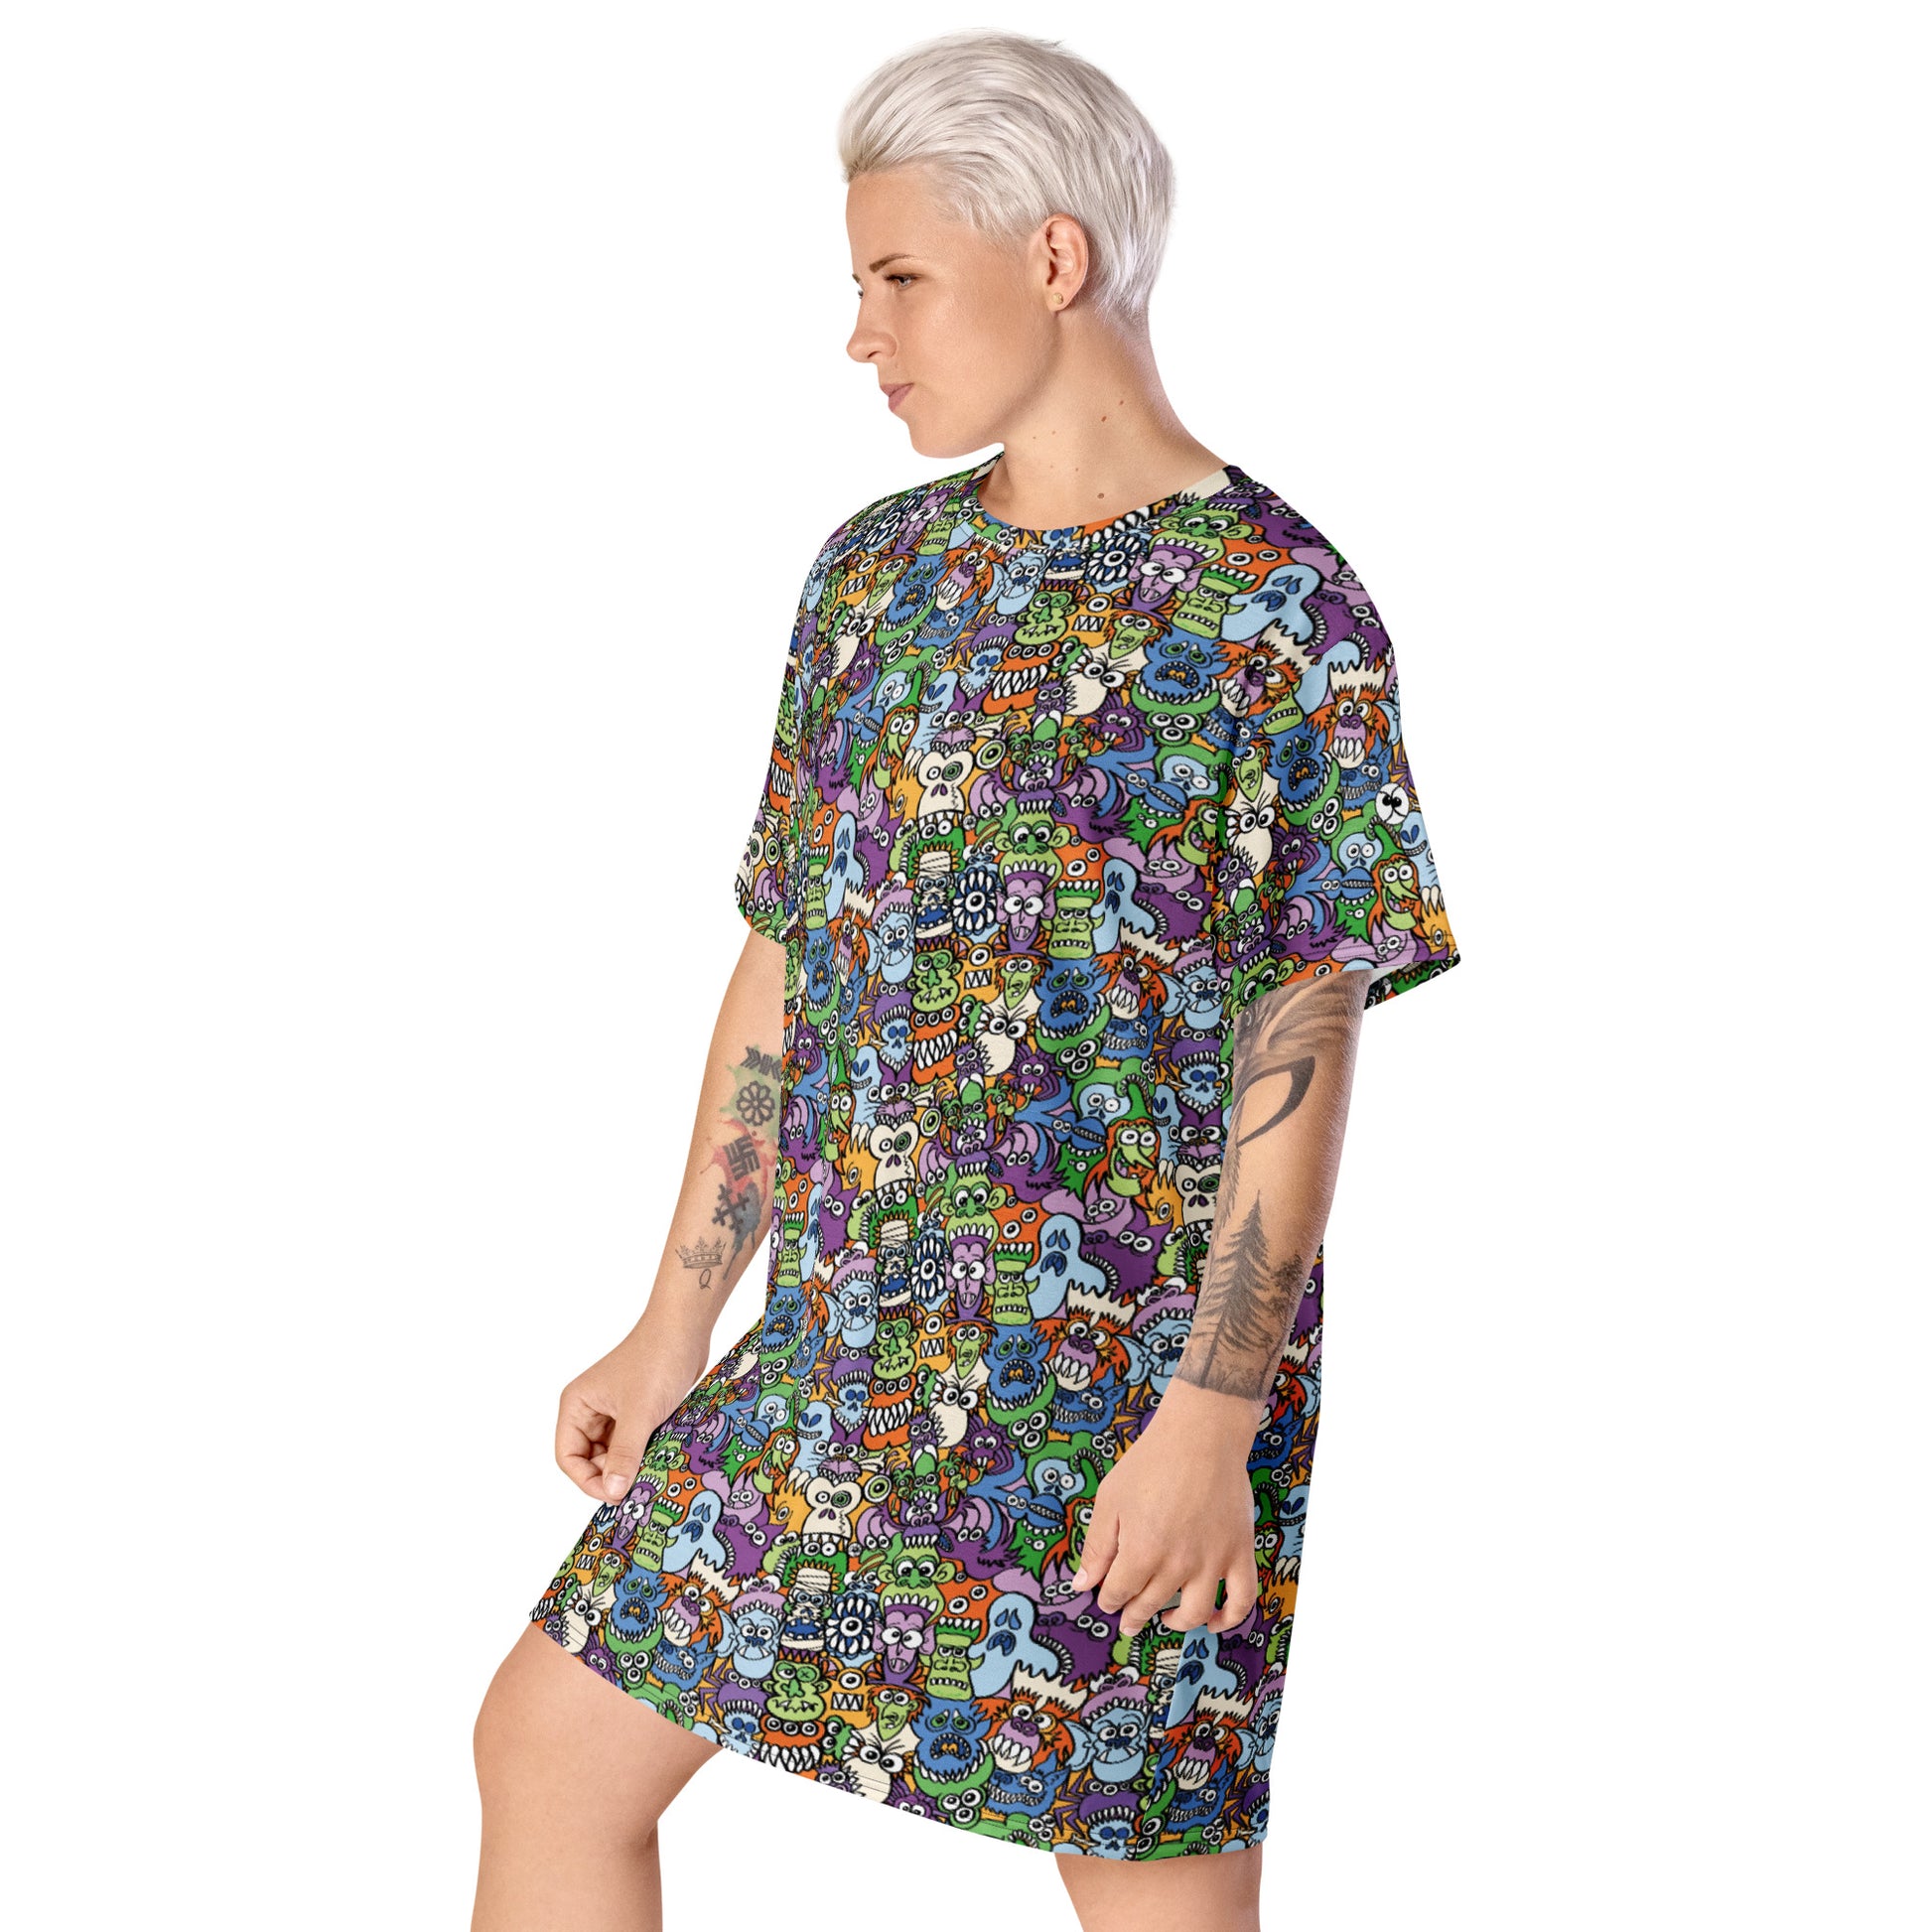 All the spooky Halloween monsters in a pattern design T-shirt dress. Side view